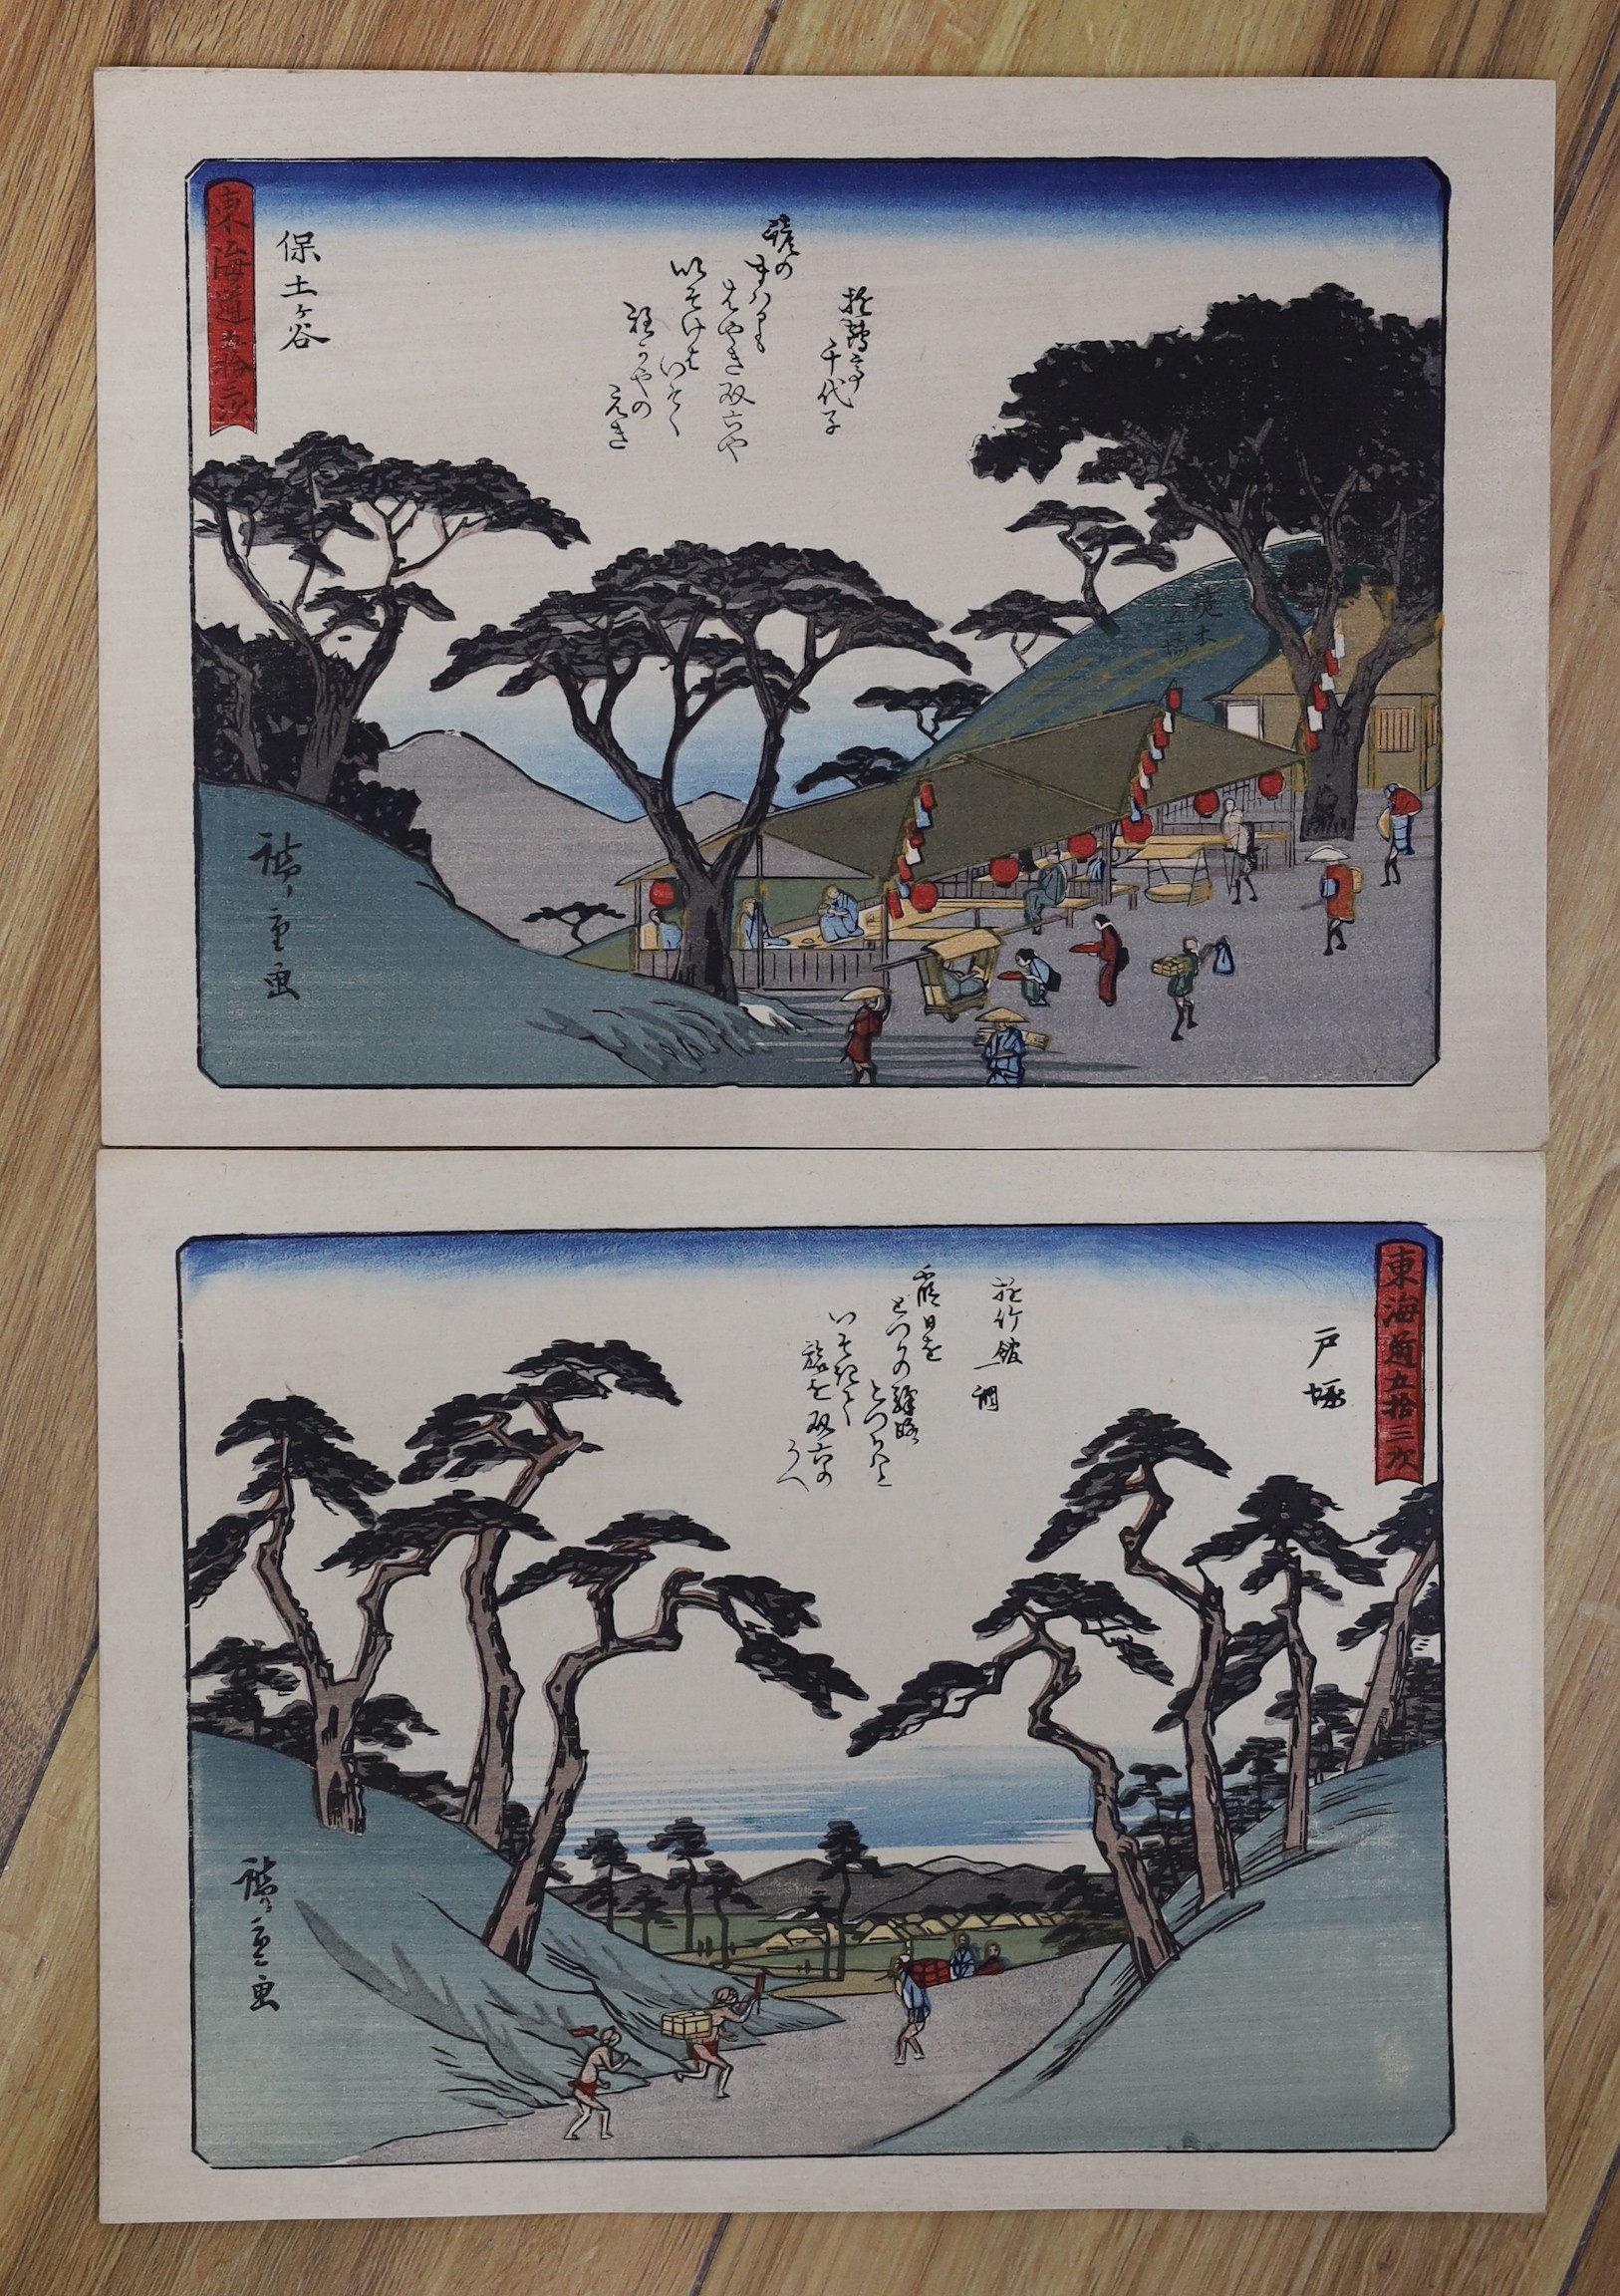 Hiroshige, two woodblock prints, Stations of The Tokaido, 21 x 29cm, unframed